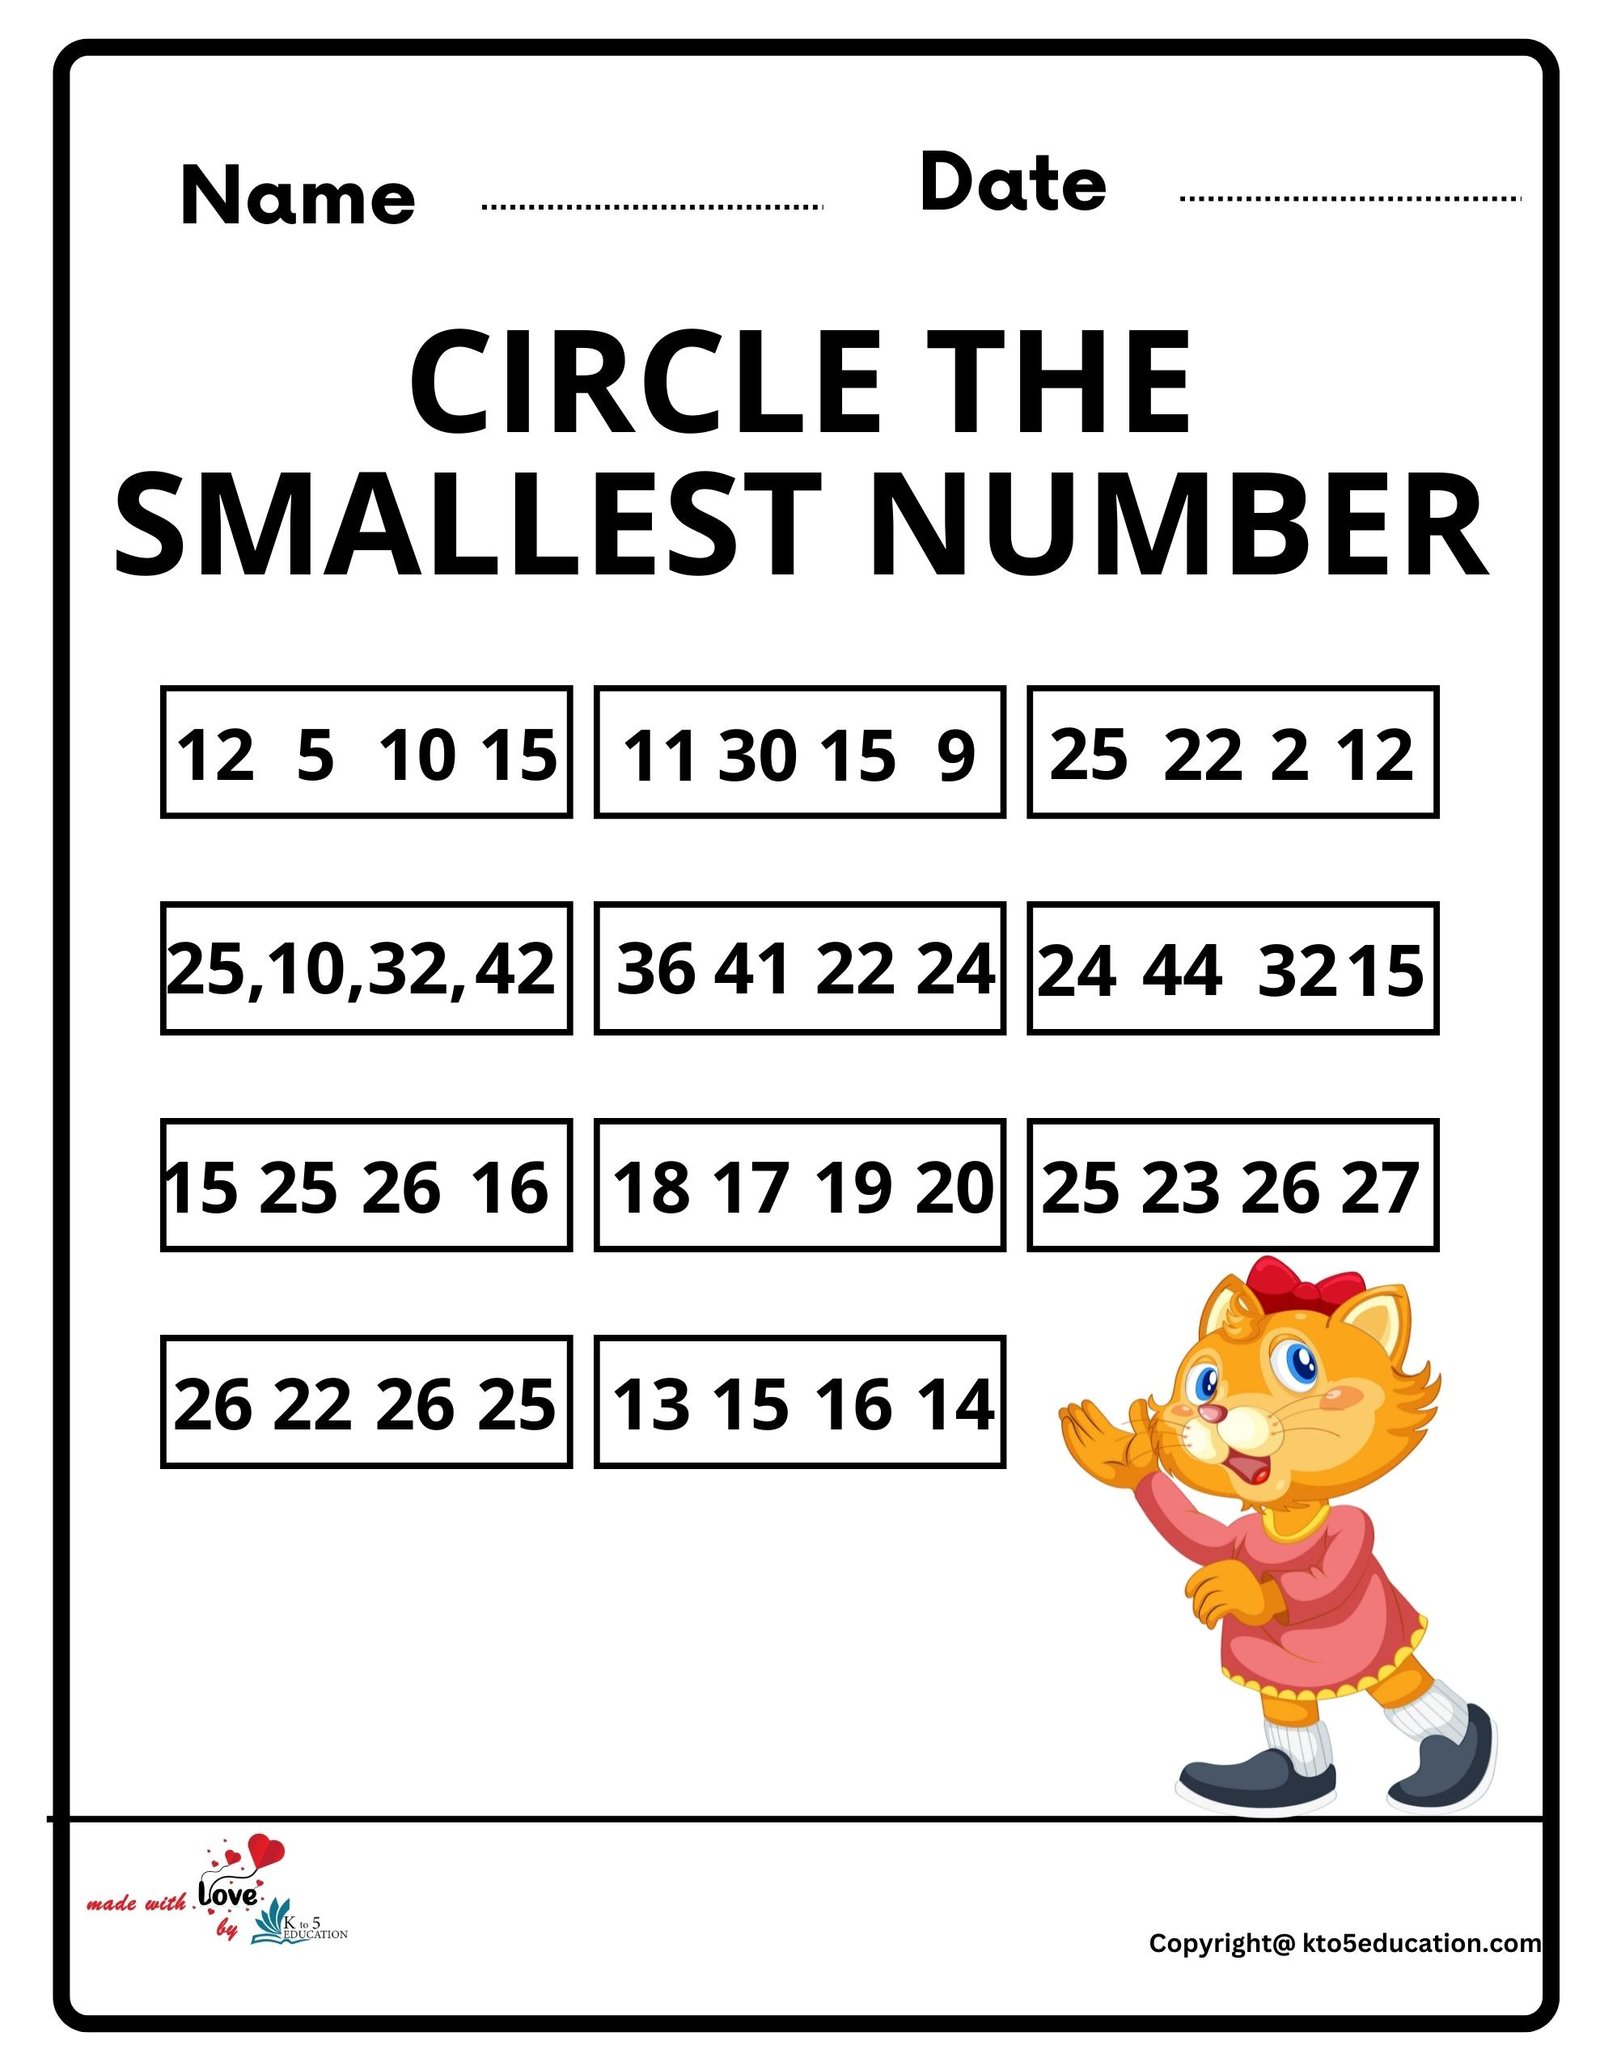 Circle The Smallest Number Worksheet 2